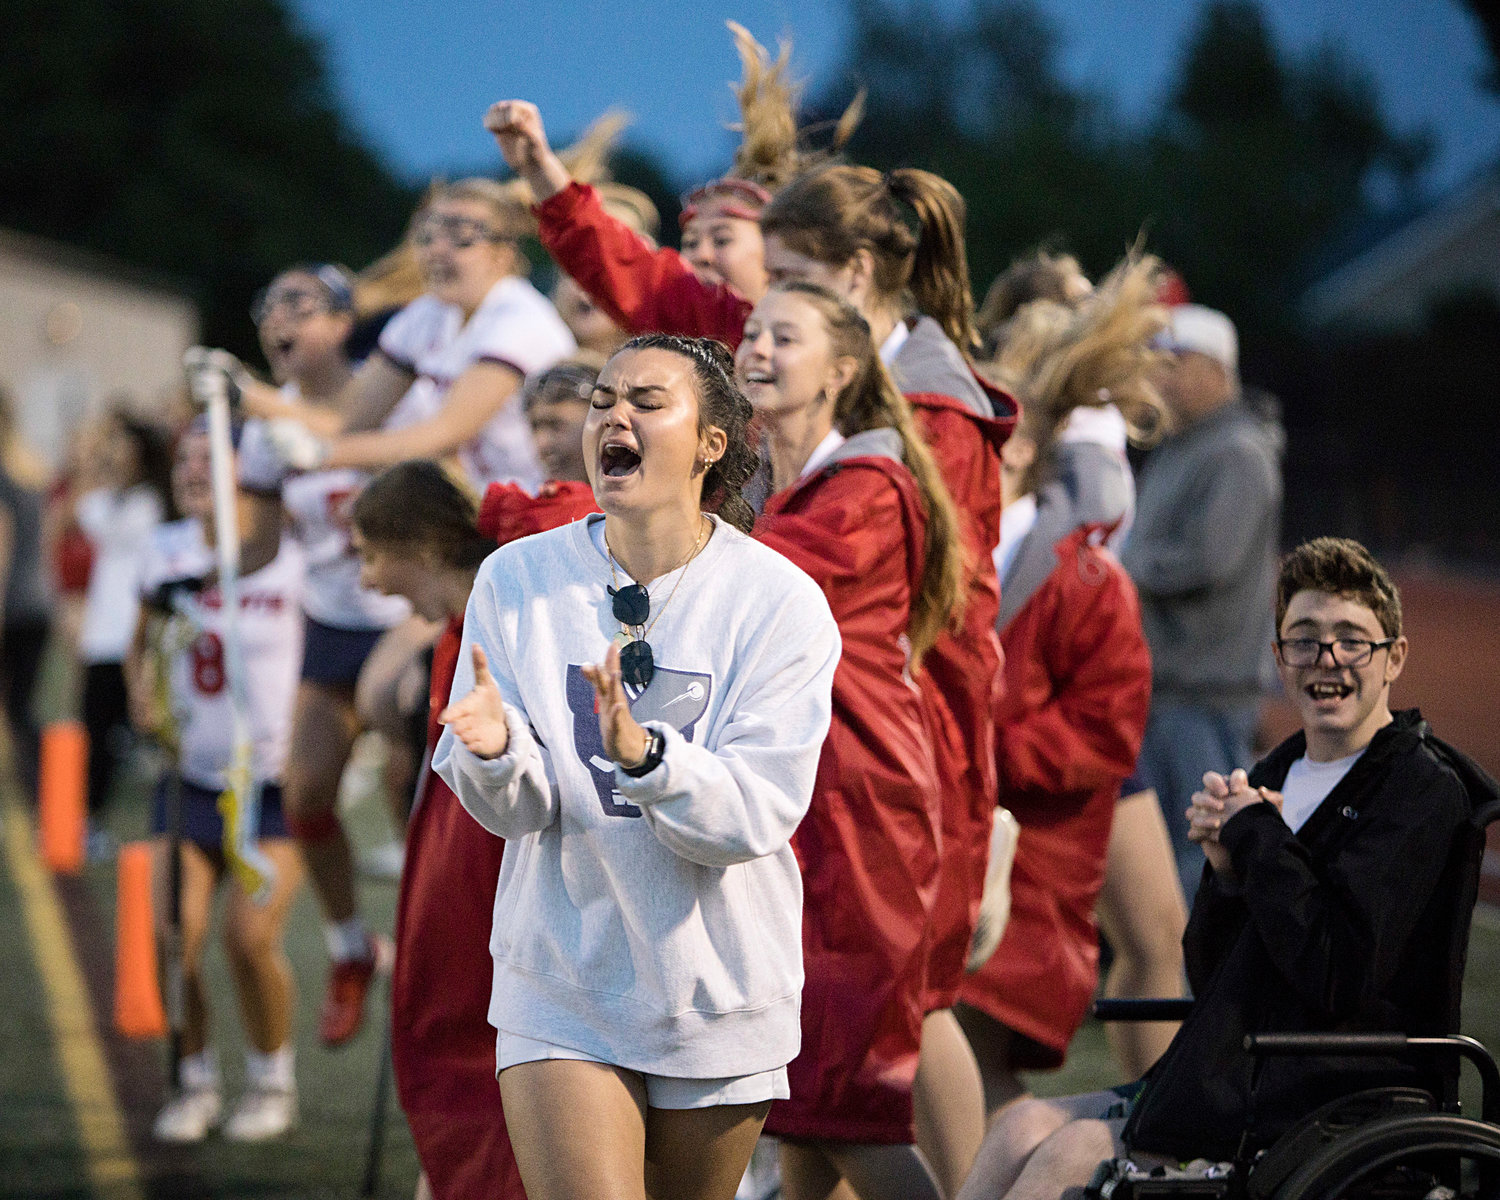 Players on the sideline cheer as the Patriots take the lead late in the second half of the Division II semifinals.